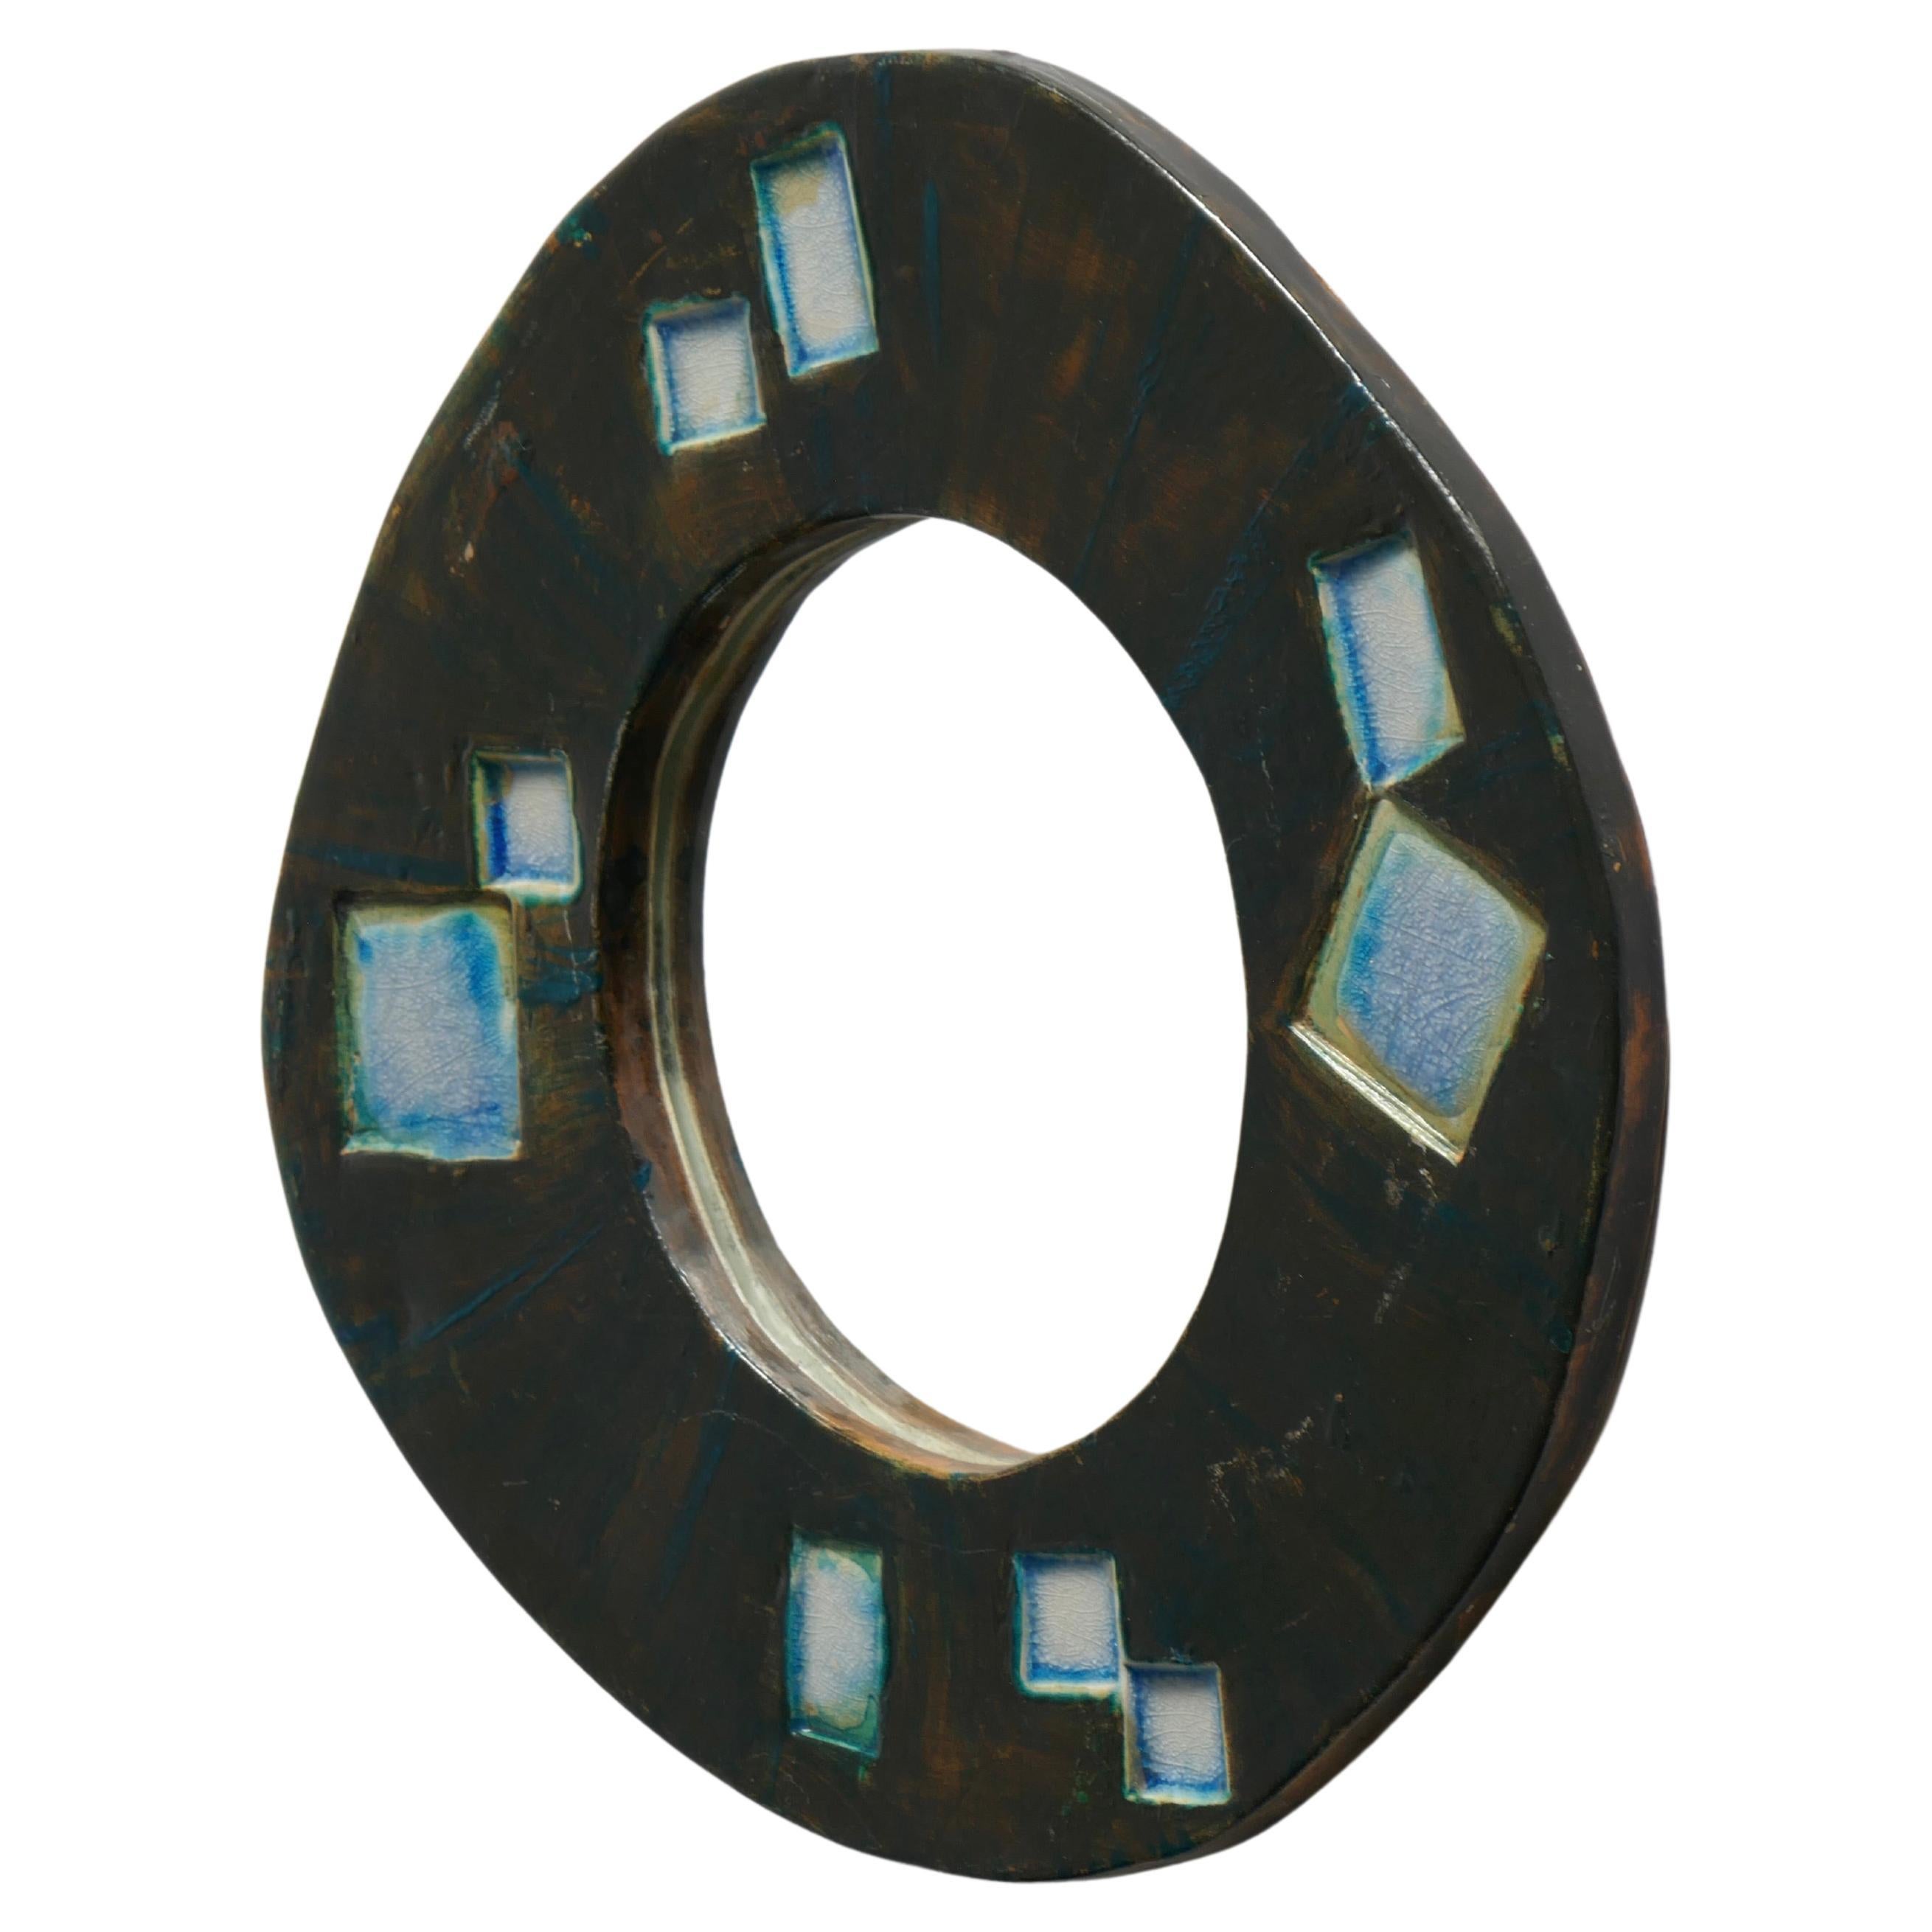 Small free shape ceramic mirror in black and brown shades, embellished with blue and creamy white geometric patterns. French work from the 1960s. This very decorative mirror can be presented as a wall mirror. It does not have a hook on the back but